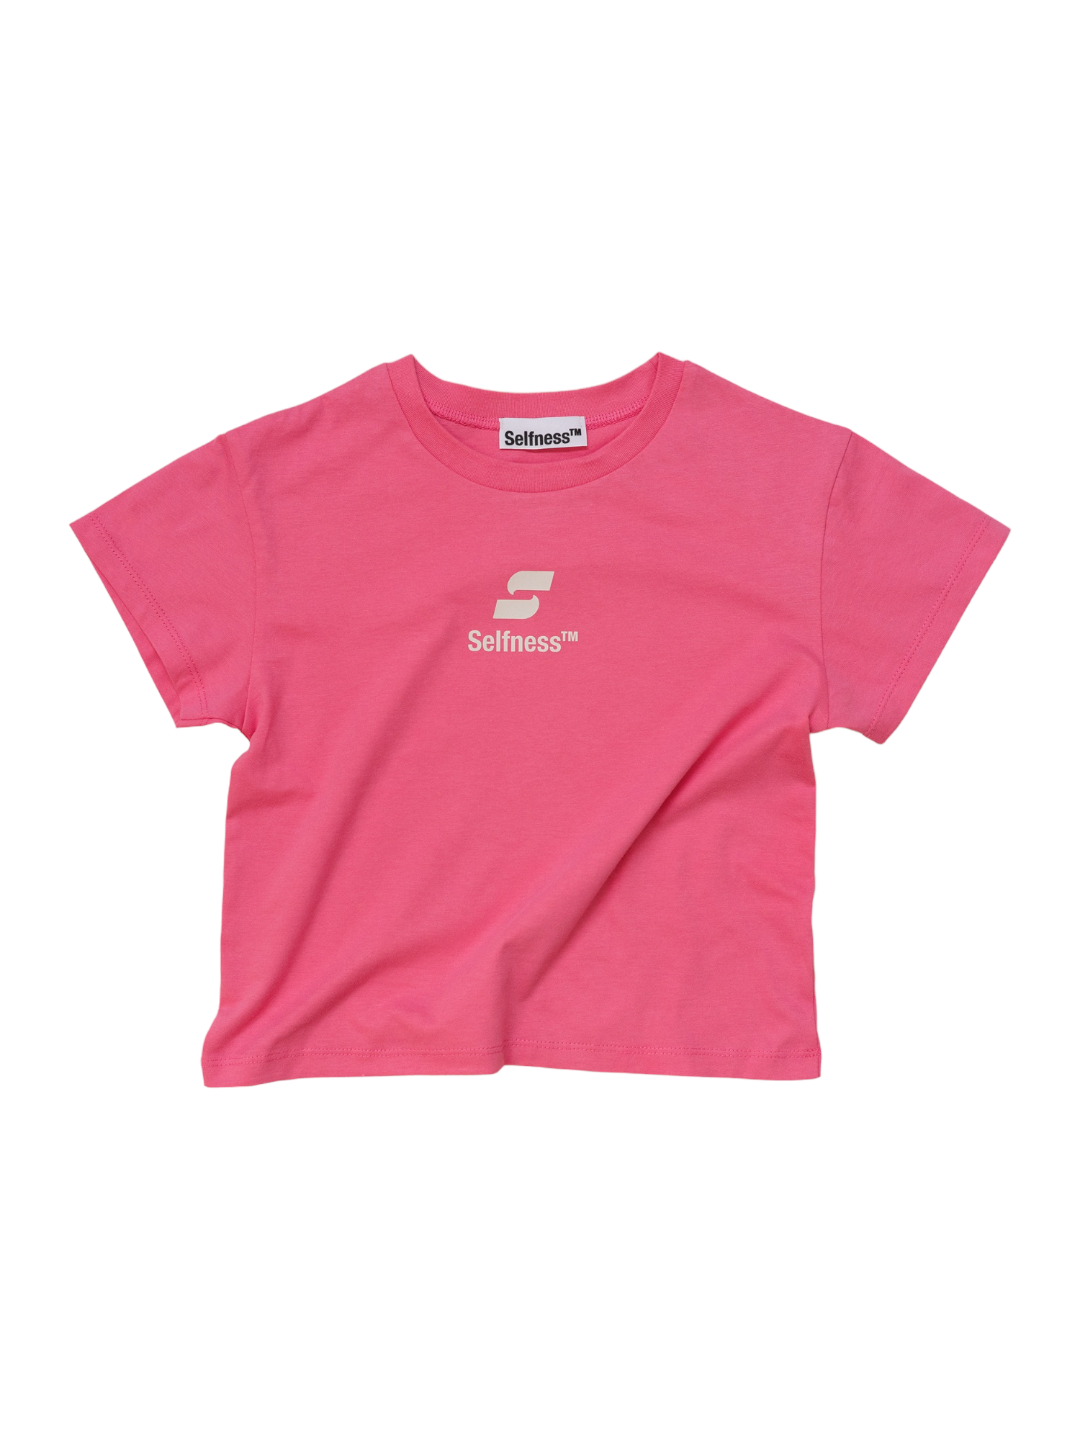 SPORTY LOGO T-SHIRT SMALL FIT IN PINK